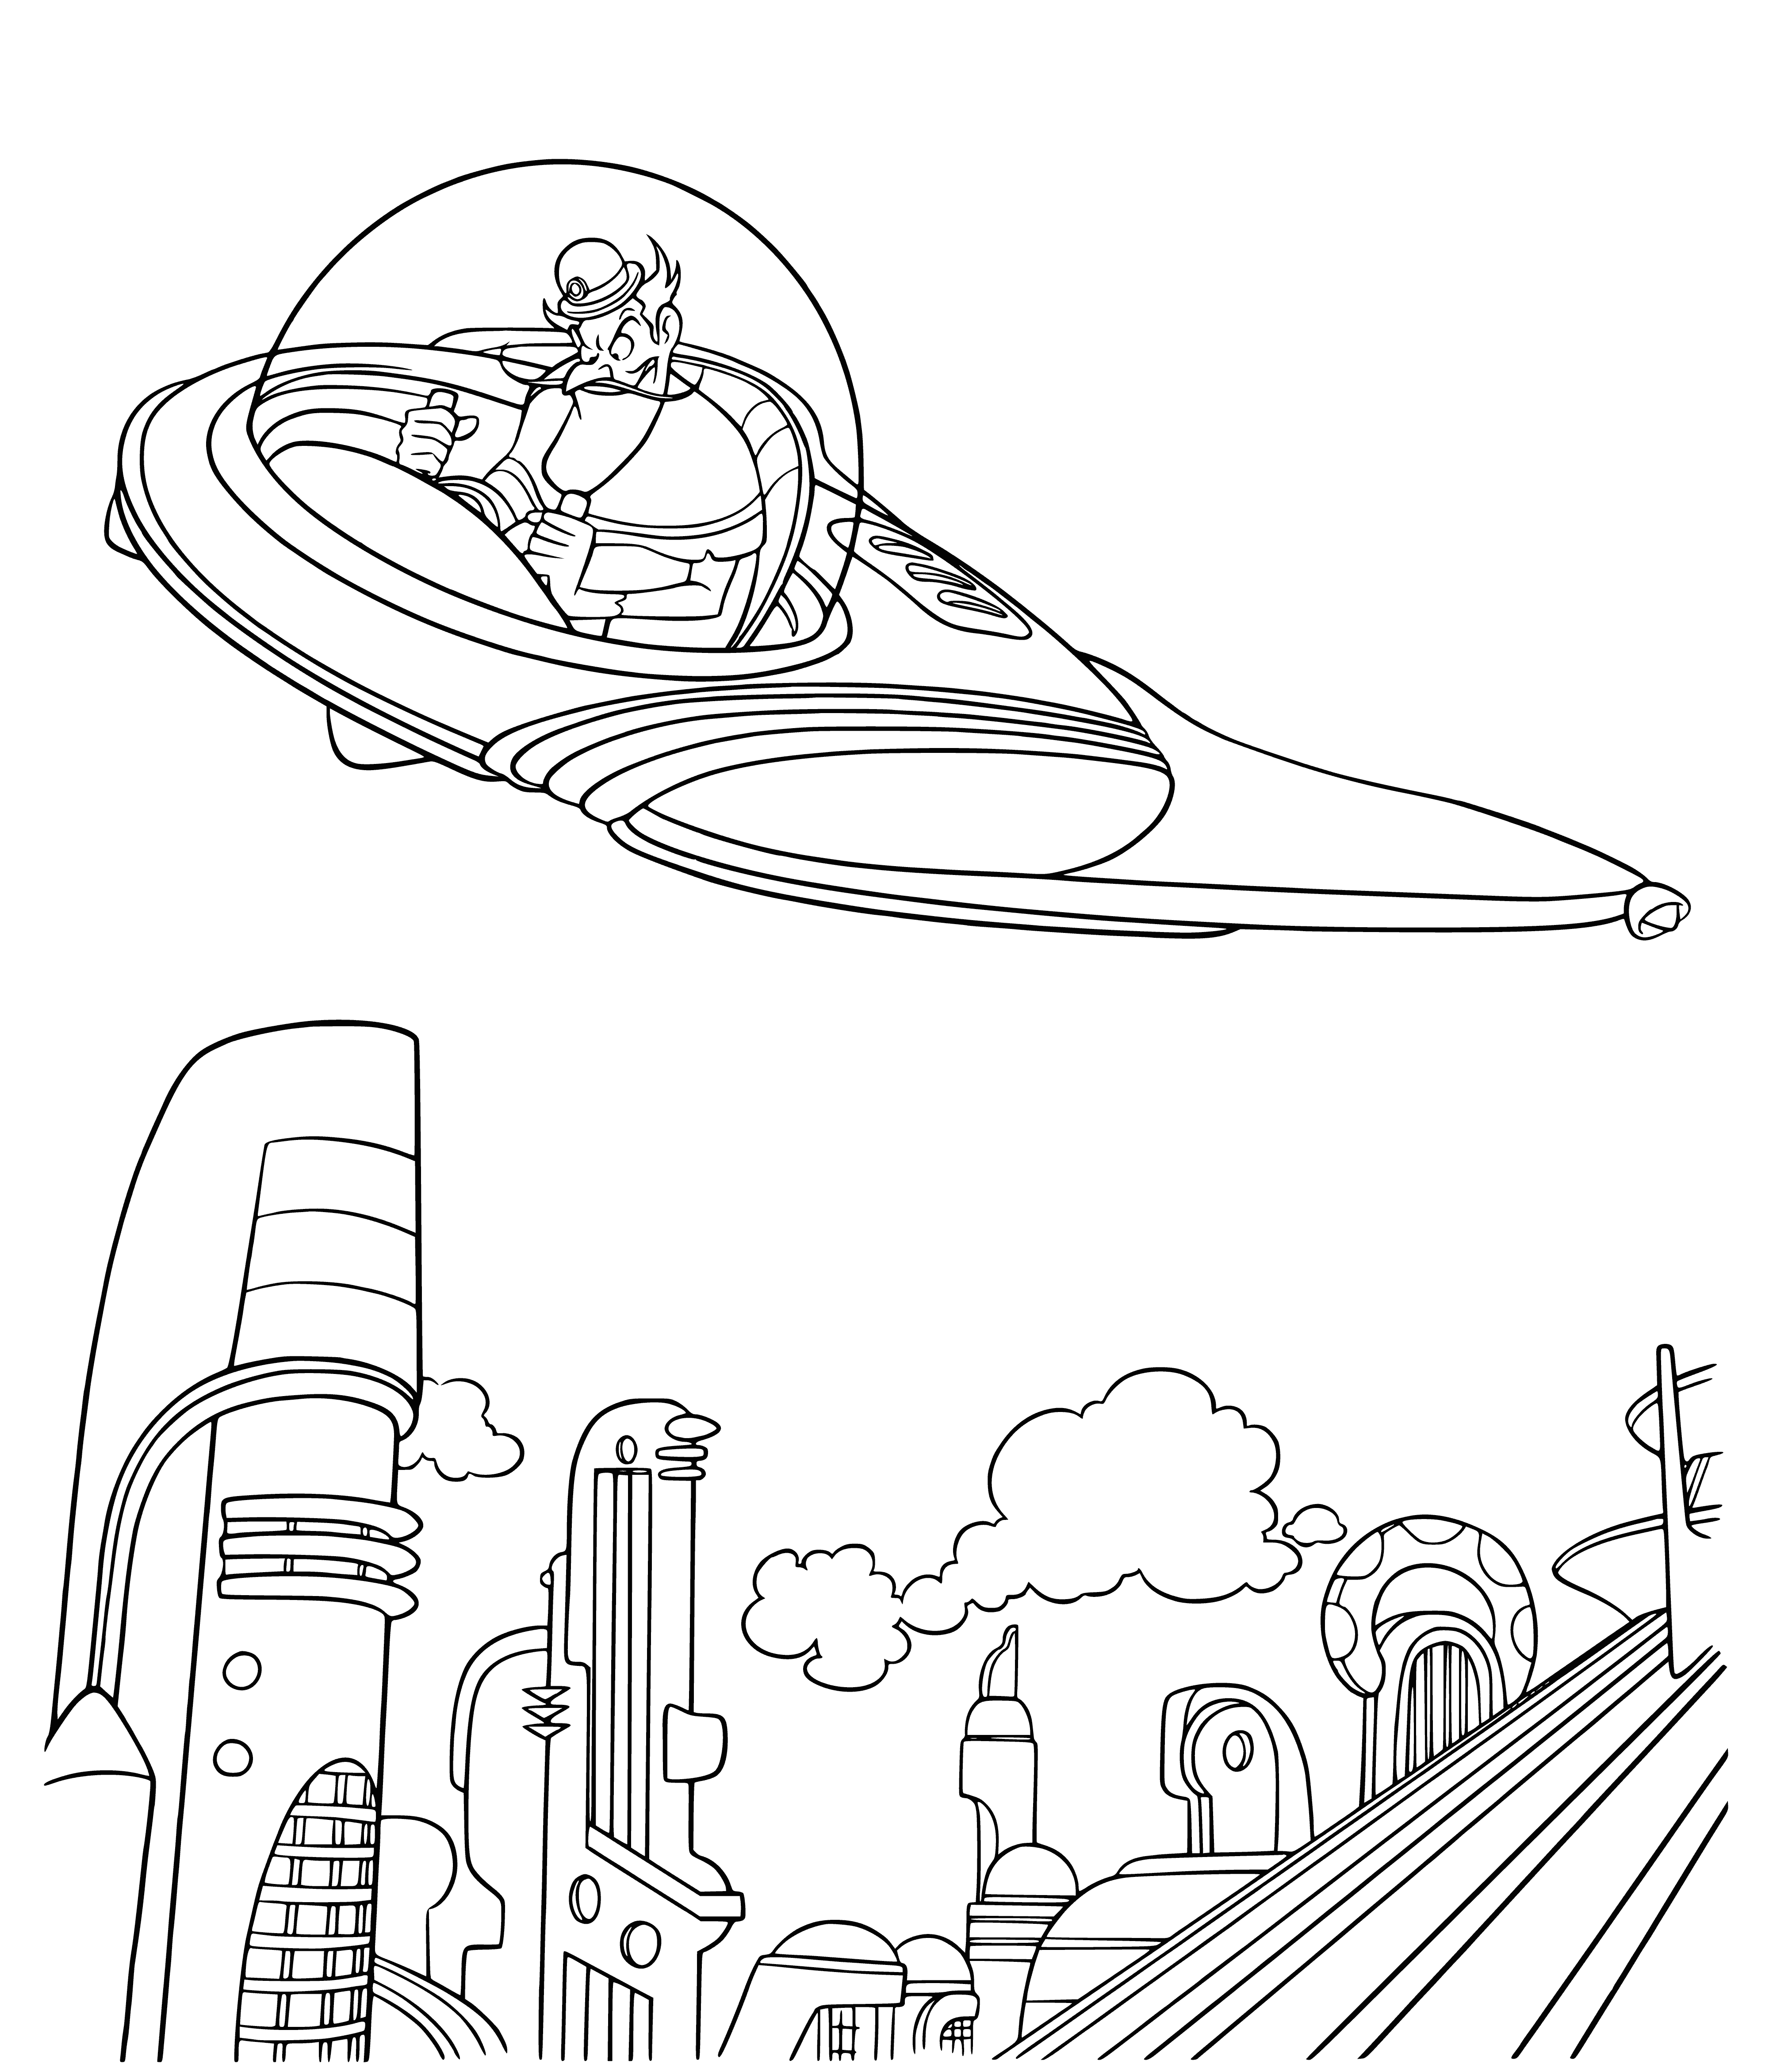 coloring page: A futuristic city filled with advanced tech & activity. Skyline lit up by bright lights & billboards. Along the horizon stands a giant Ferris wheel.